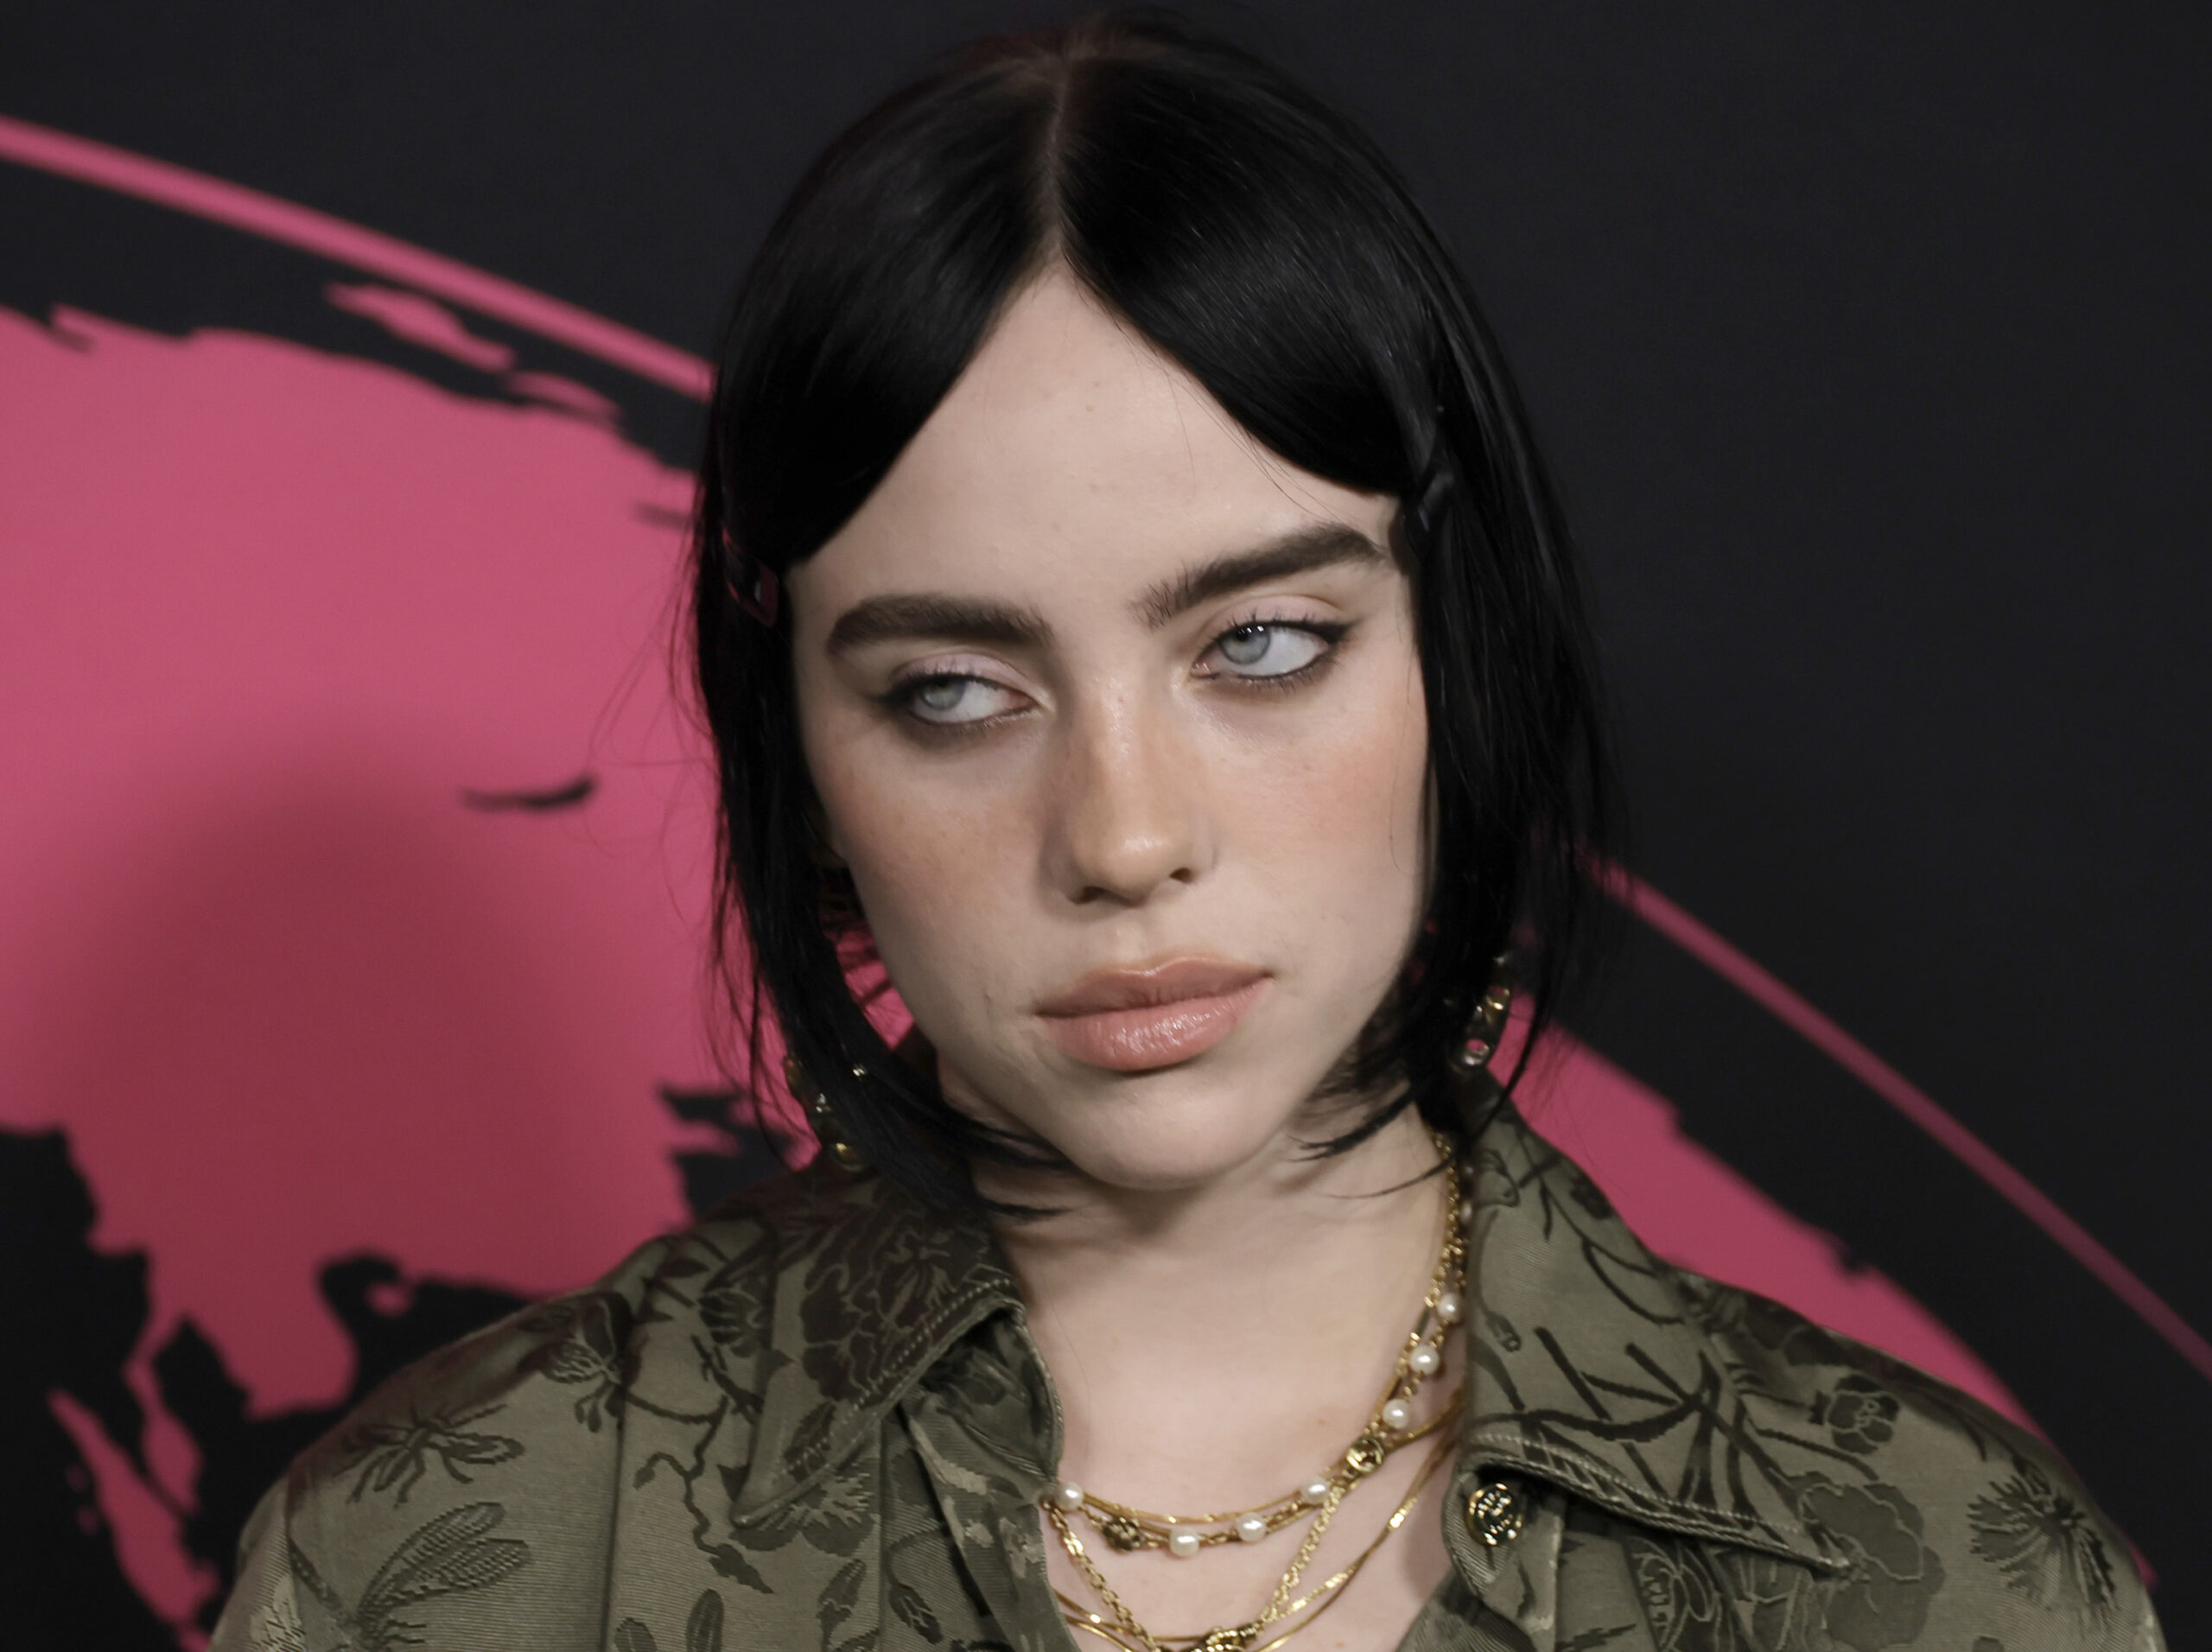 Billie Eilish slams Variety for ‘outing’ her: ‘Leave me be